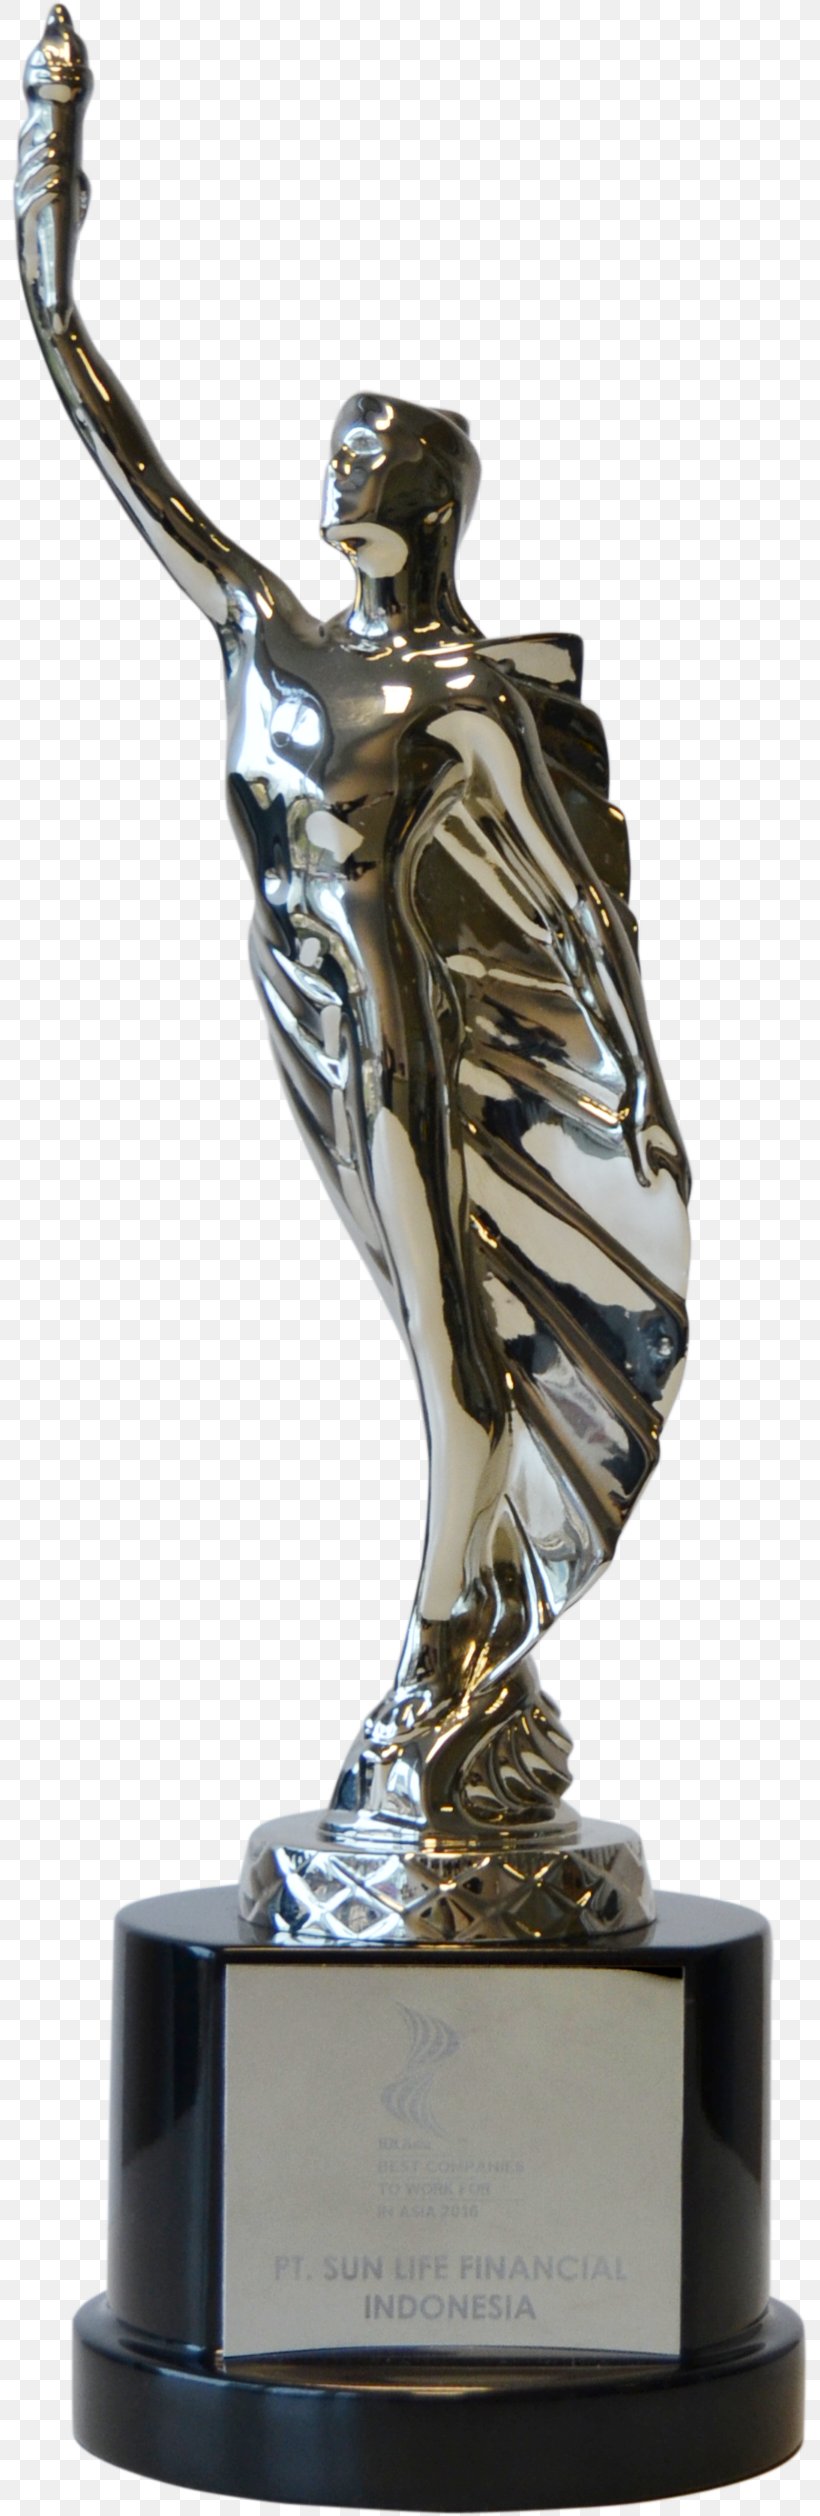 Trophy Award Sun Life Financial Figurine Indonesia, PNG, 799x2516px, 2016, 2017, Trophy, Asia, Award Download Free